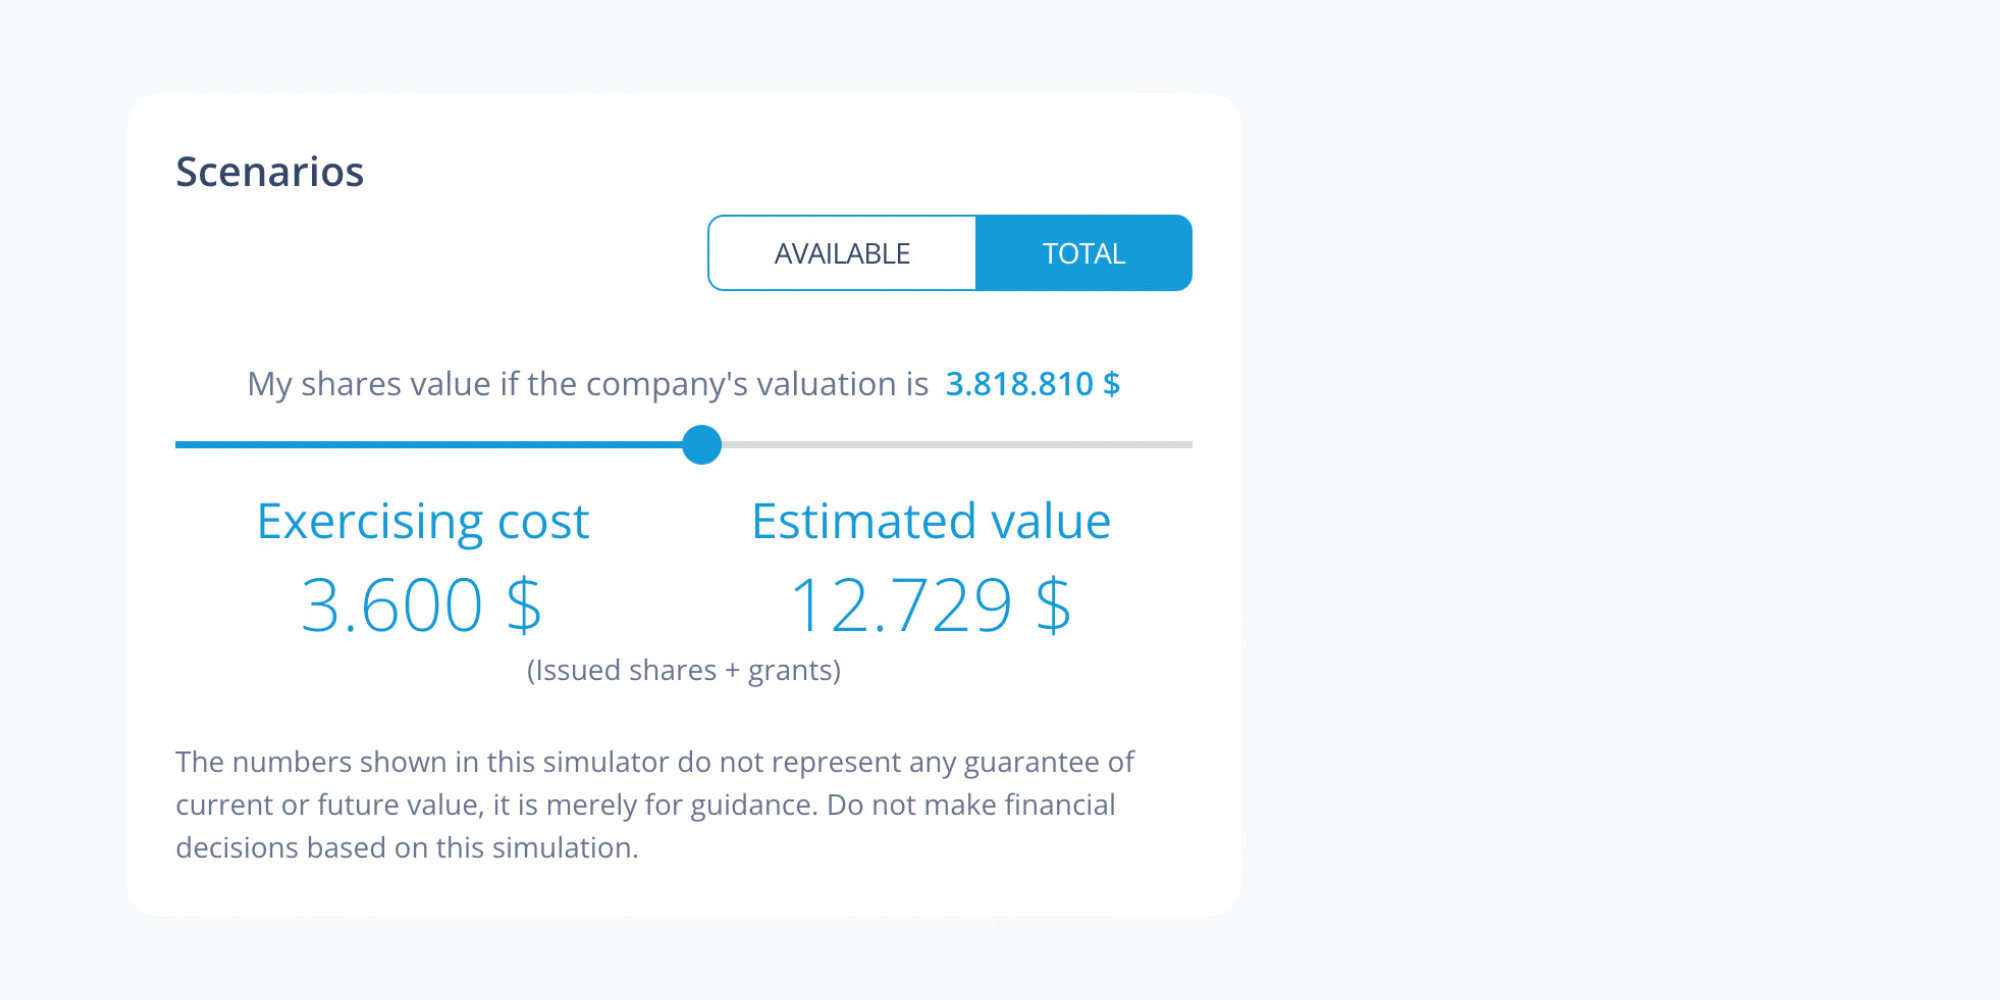 A scenario modeling tool to predict the value of your equity based on the company's valuation.